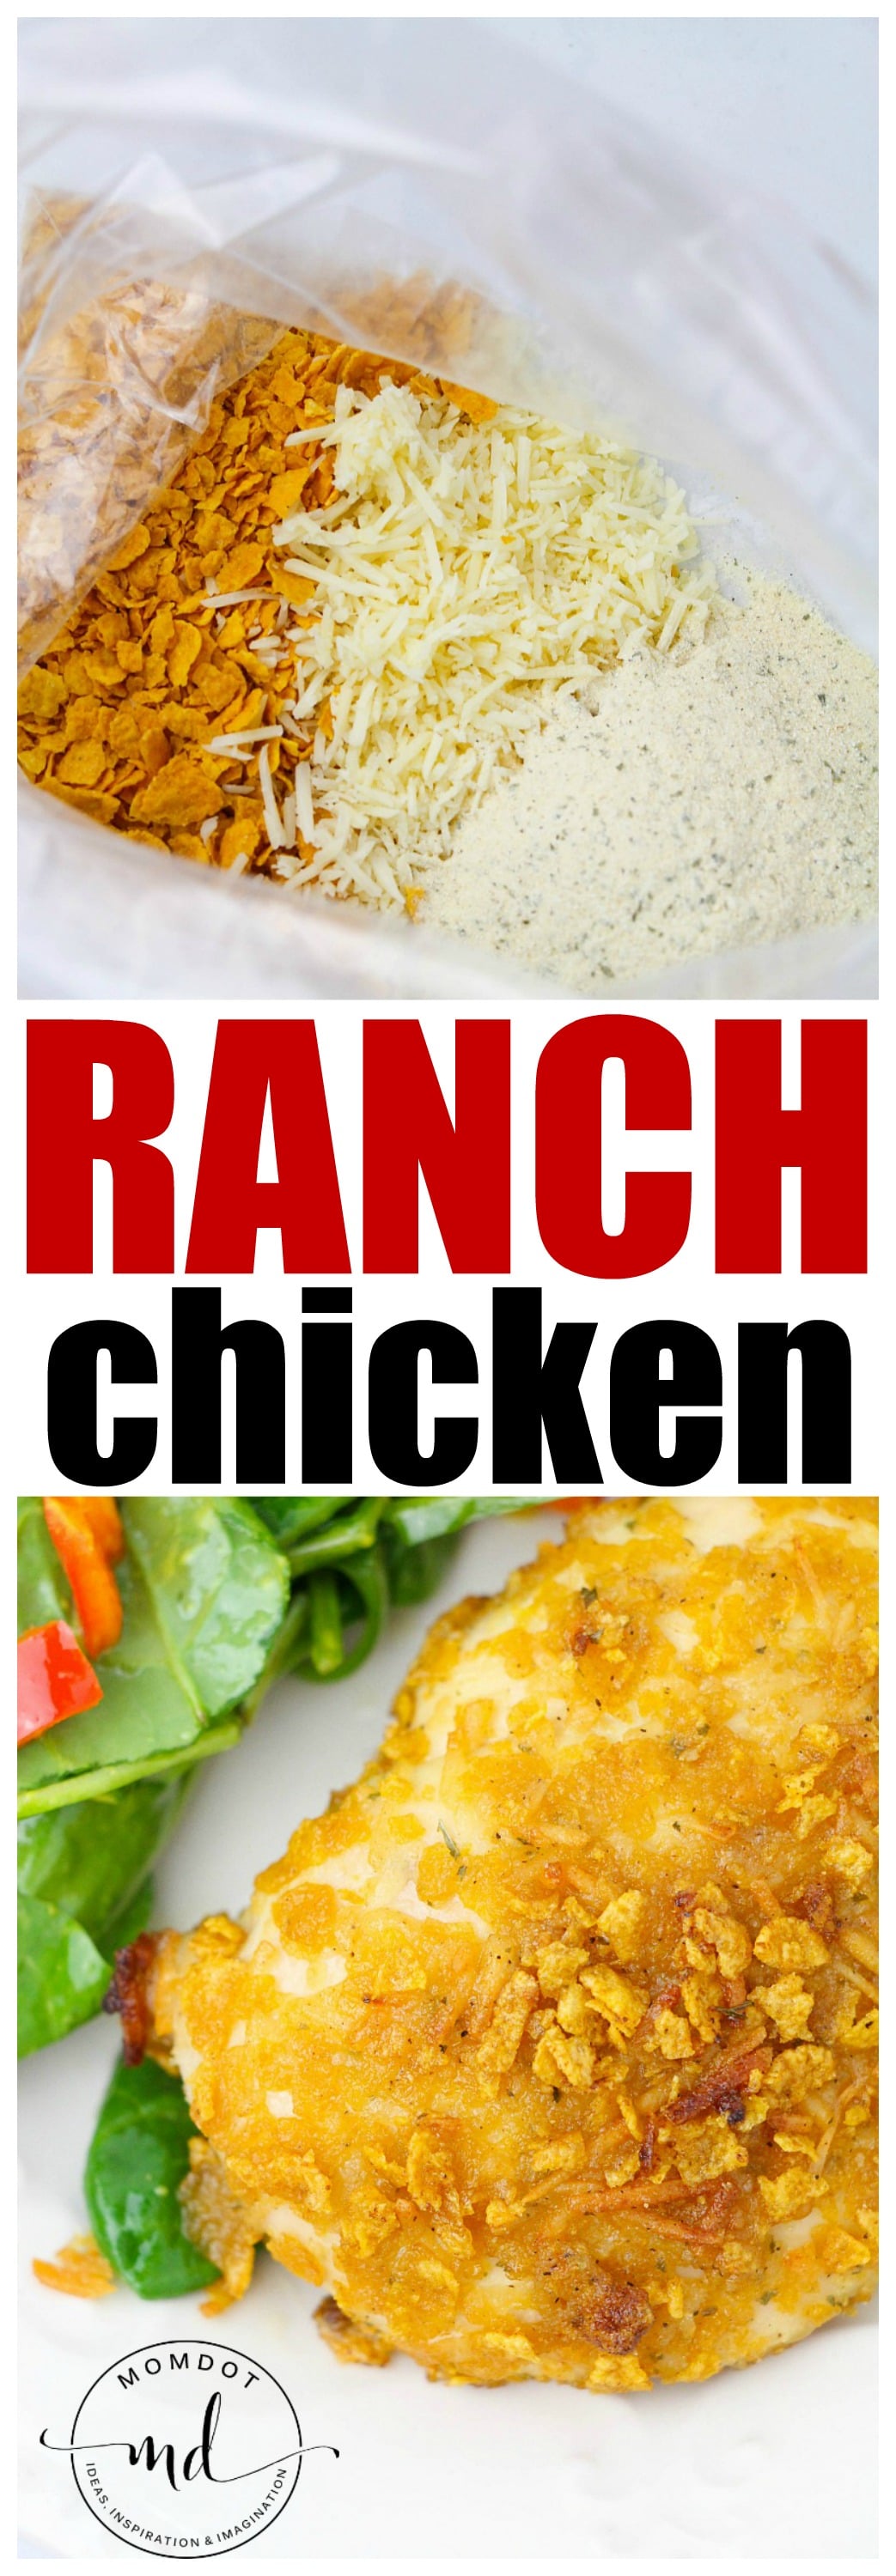 Ranch Chicken Recipe: Parmesan and Ranch are a perfect pairing for this anytime easy family friendly baked meal